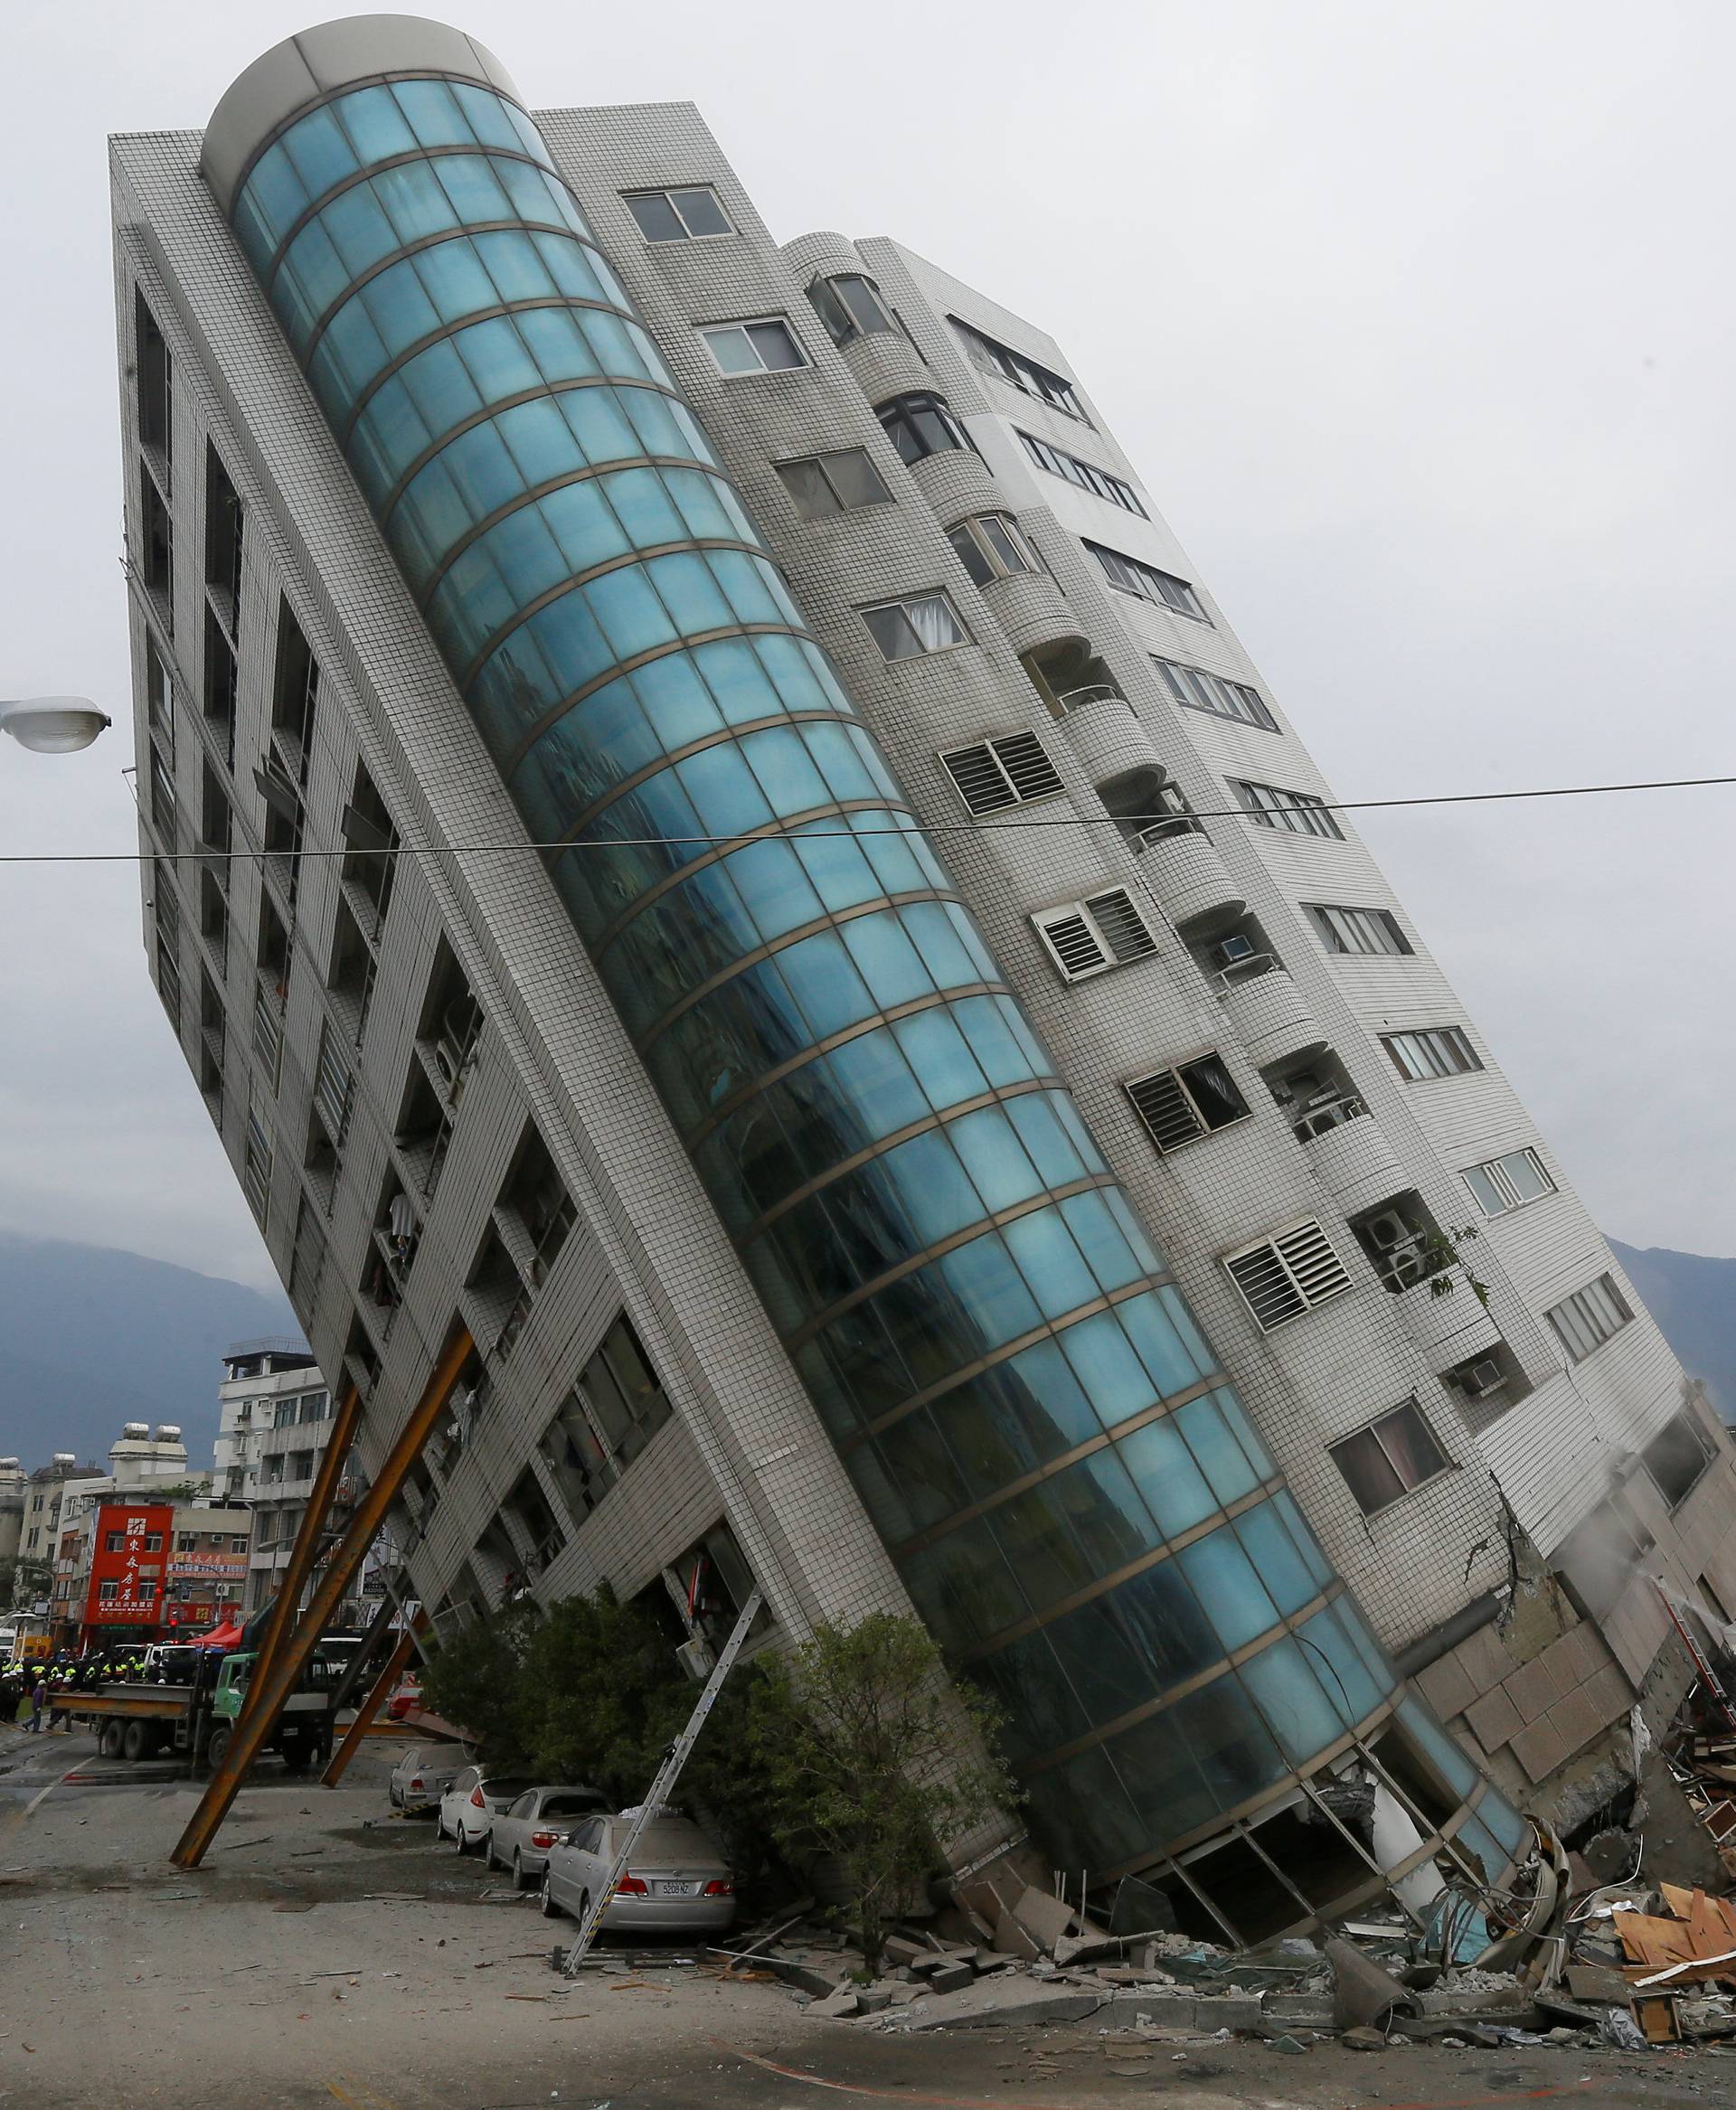 Rescue workers are seen by a damaged building after an earthquake hit Hualien